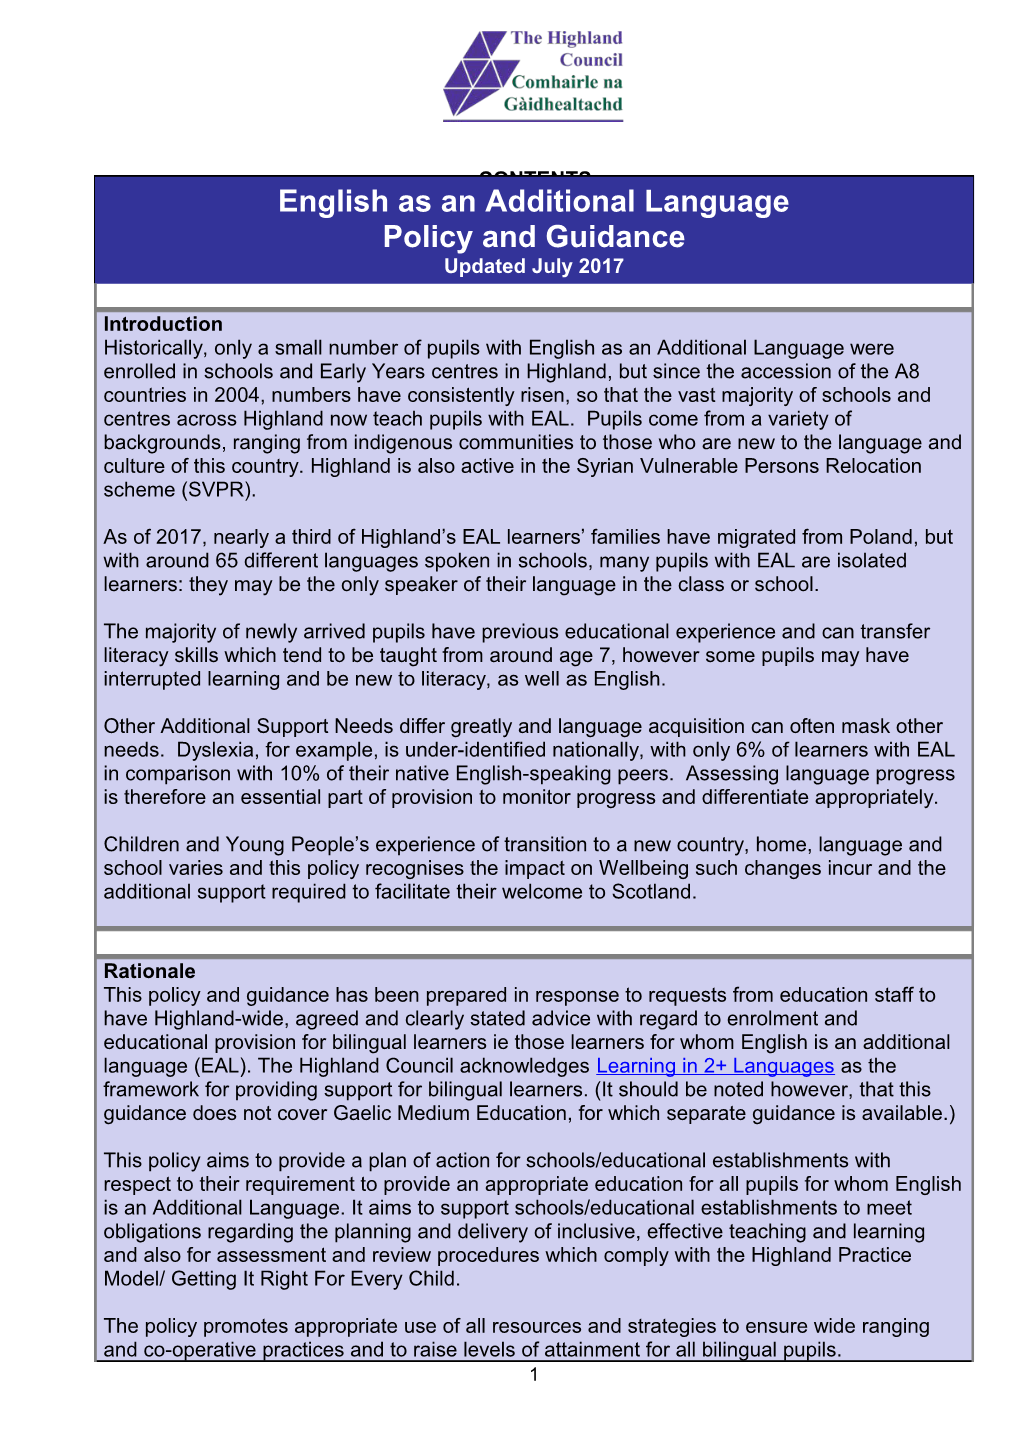 English As an Additional Language (EAL) Policy and Practice Guidance